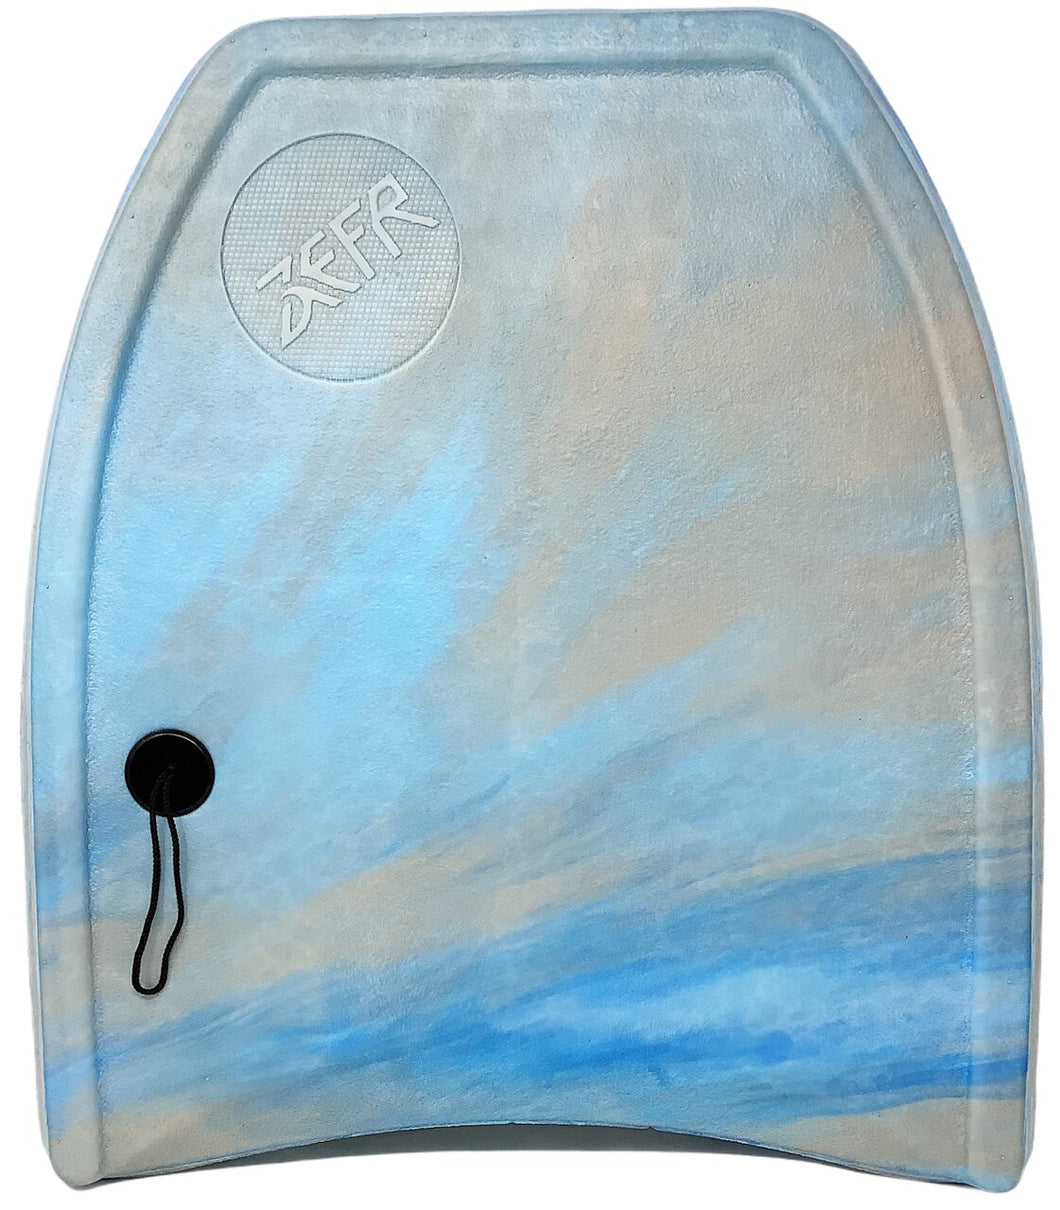 G-300 Low Rider Kick Board | Mini Bodyboard with Leash | Lightweight and Durable (Blue Tones with Grey)